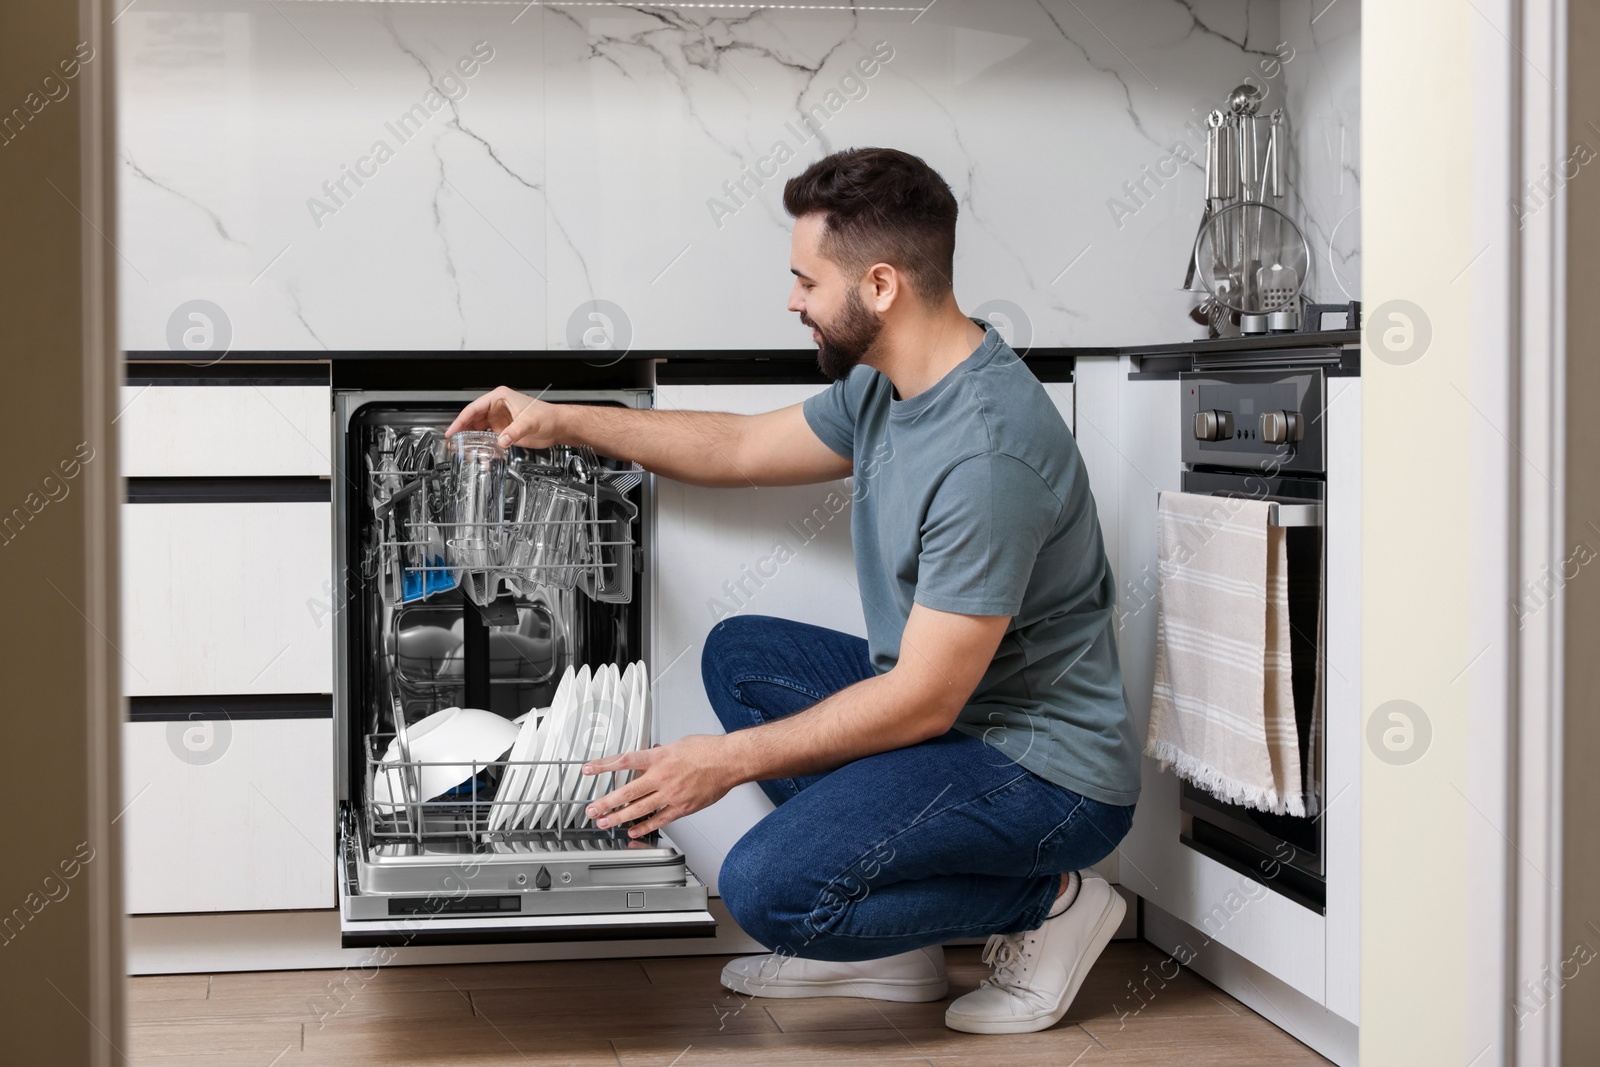 Photo of Man loading dishwasher with glasses in kitchen